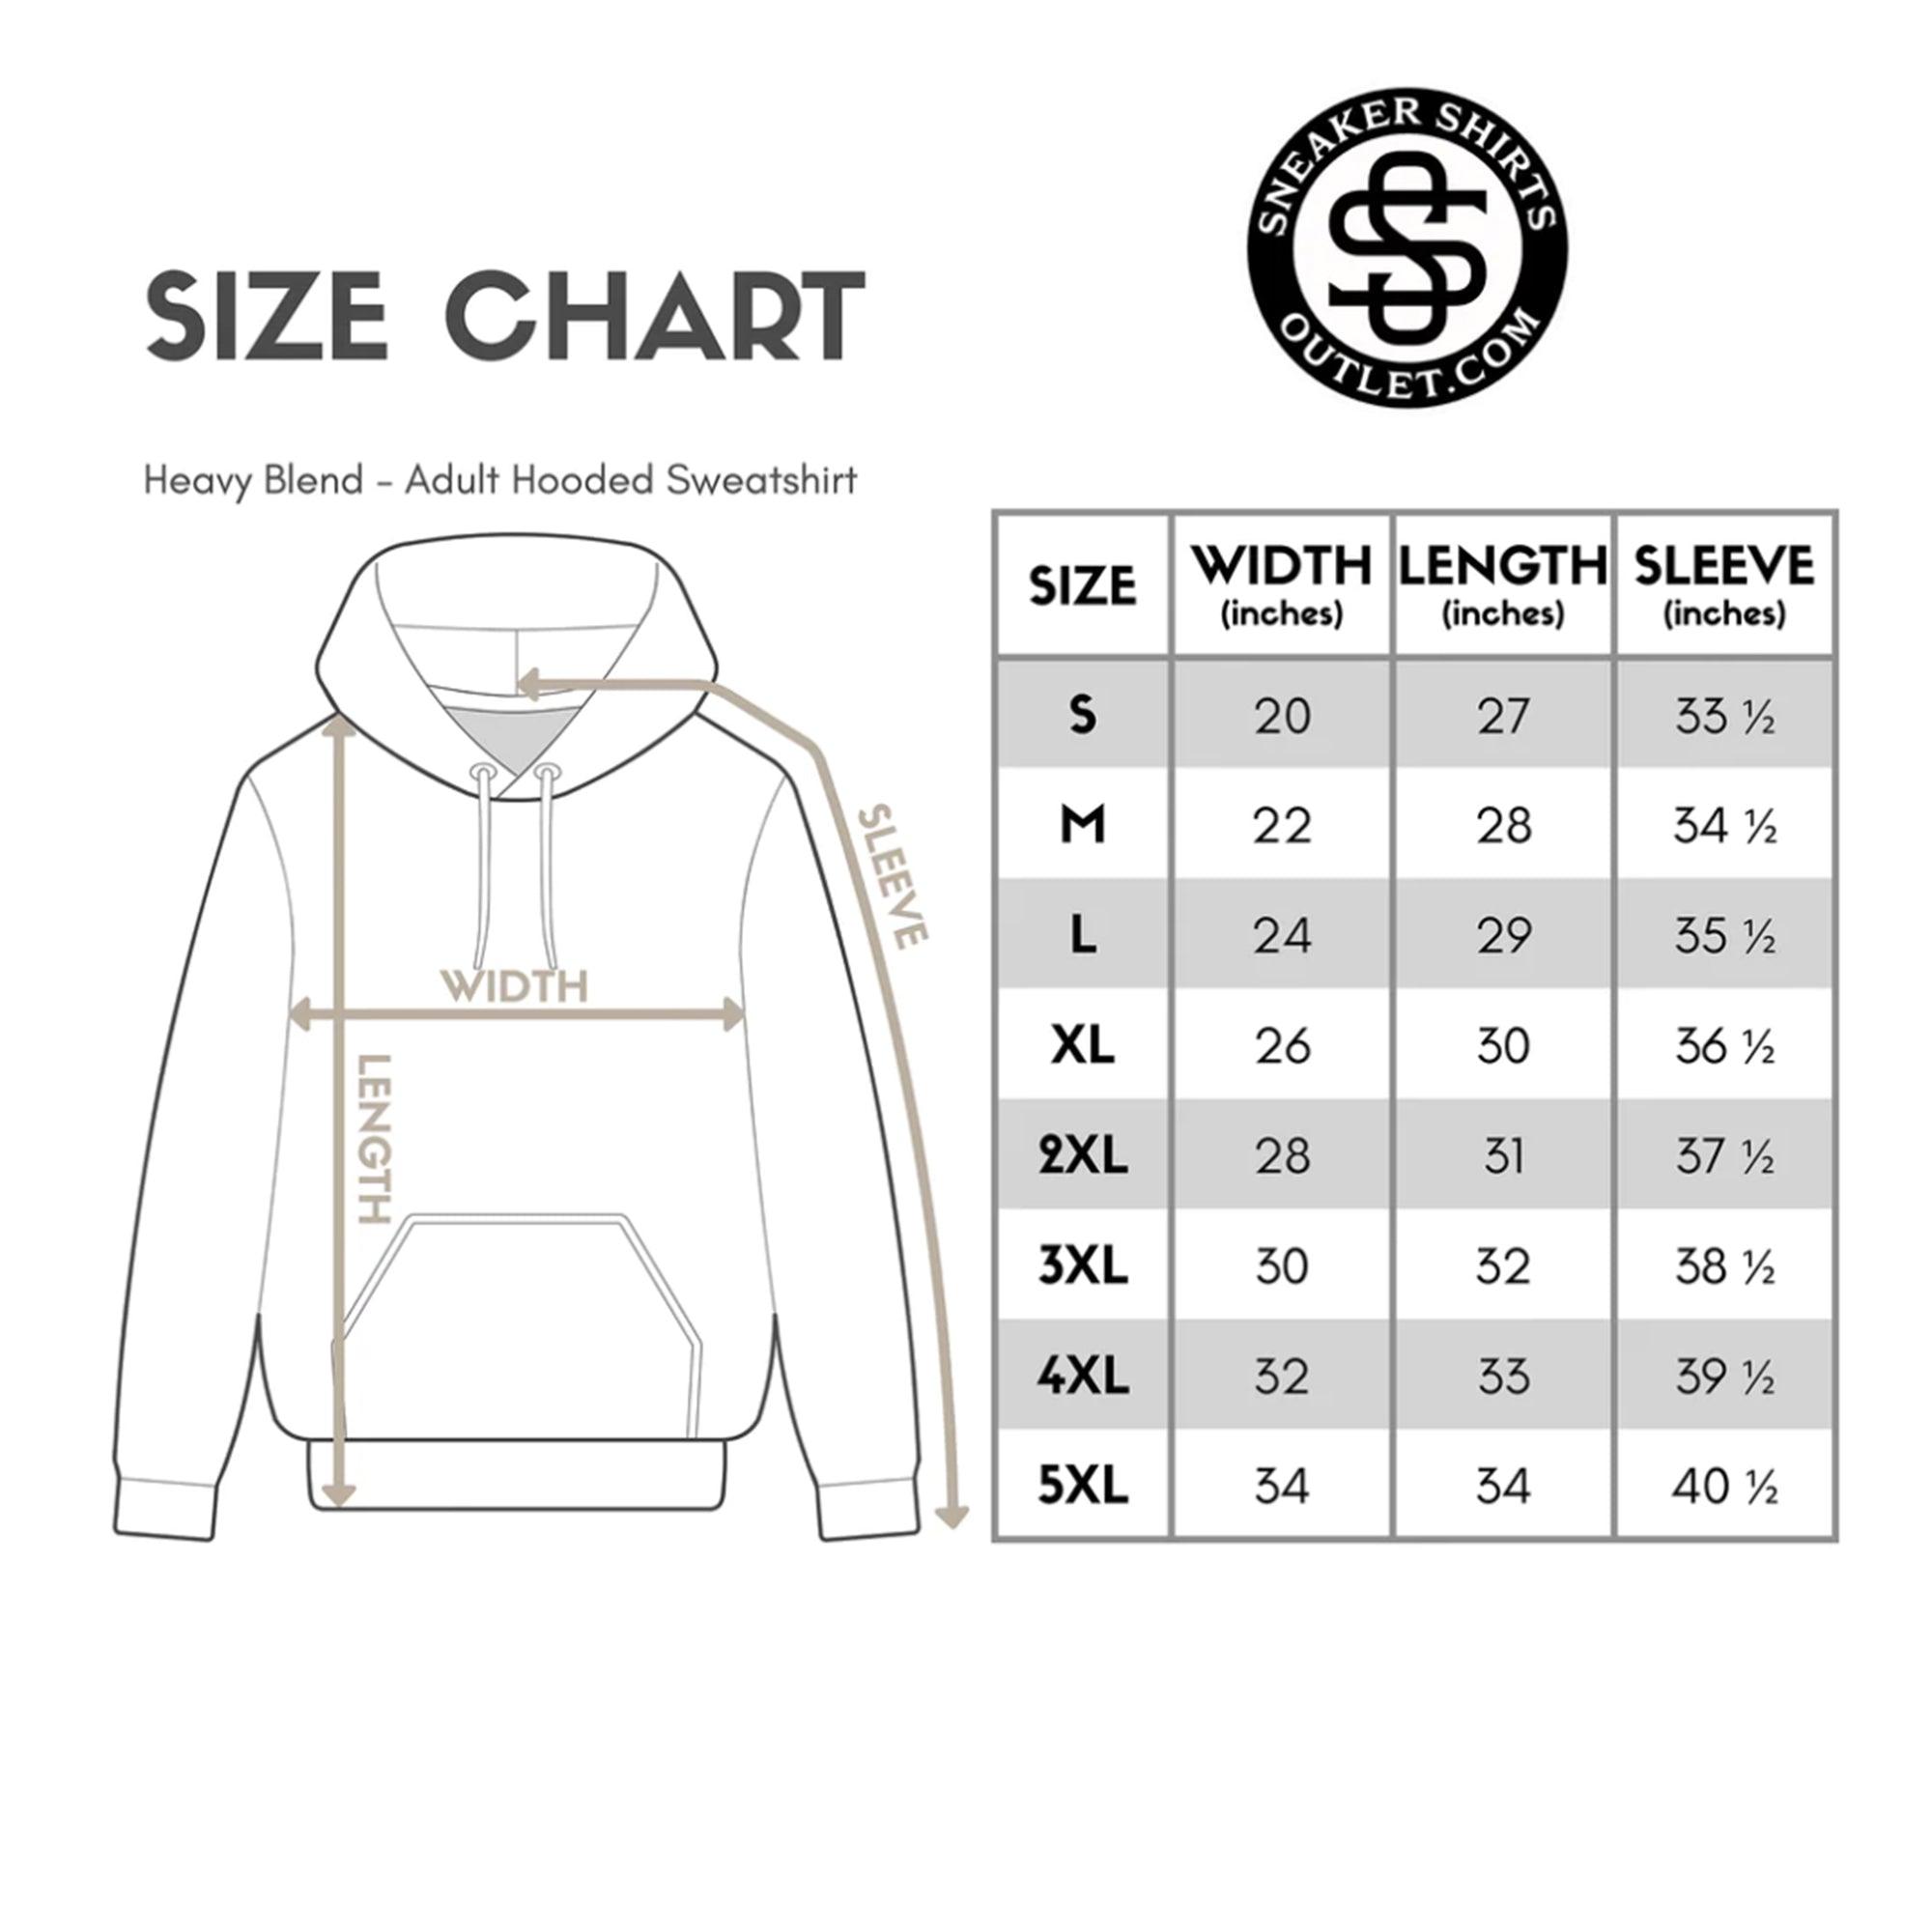 size chart 23 Melting Hoodie AJ 1 Low FlyEase photo